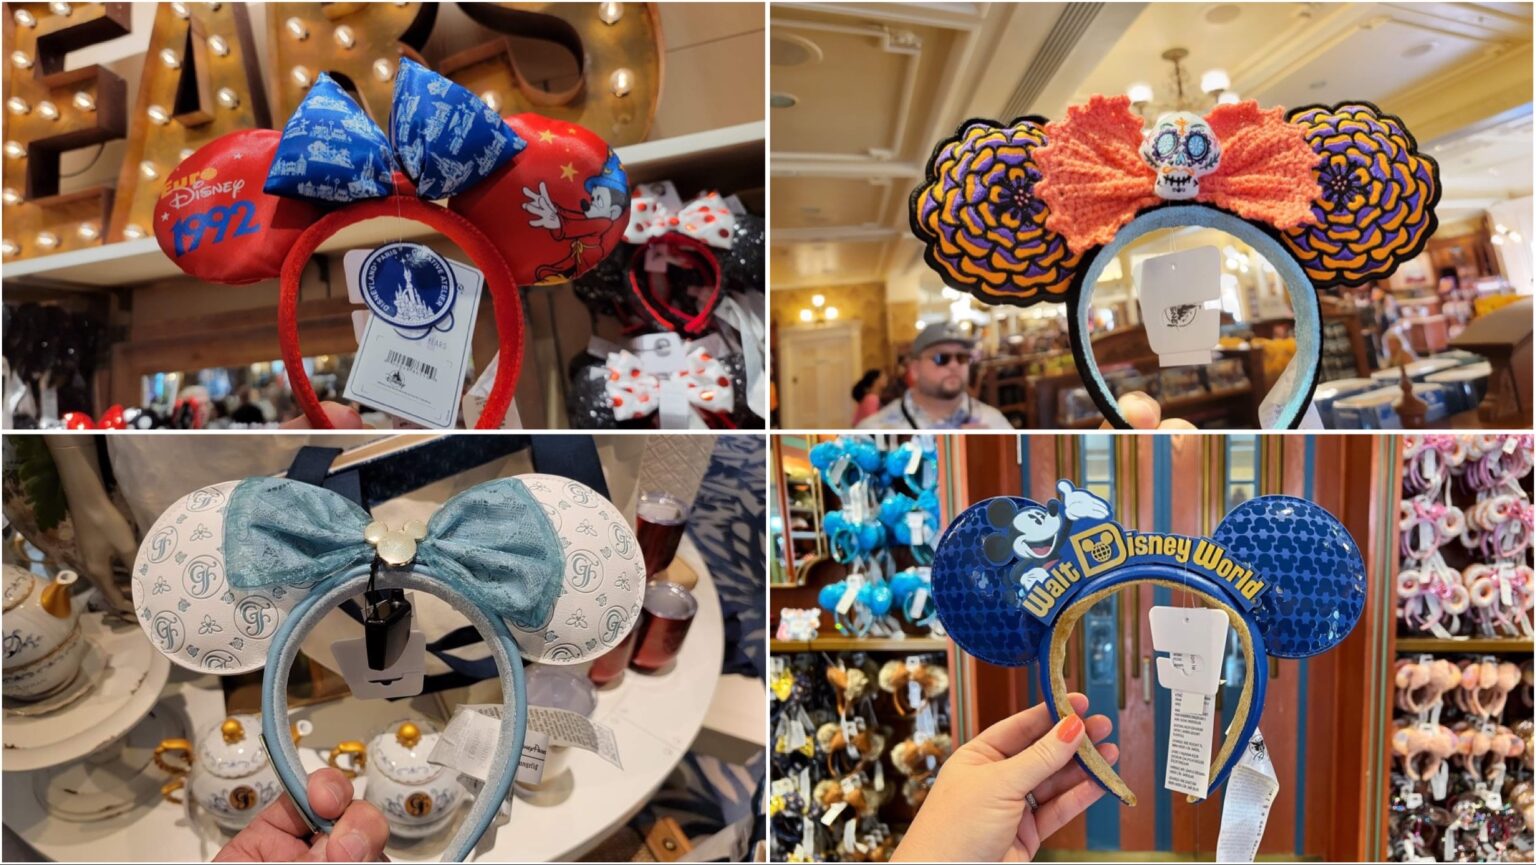 Super Cute Minnie Ears Available At Walt Disney World Right Now!